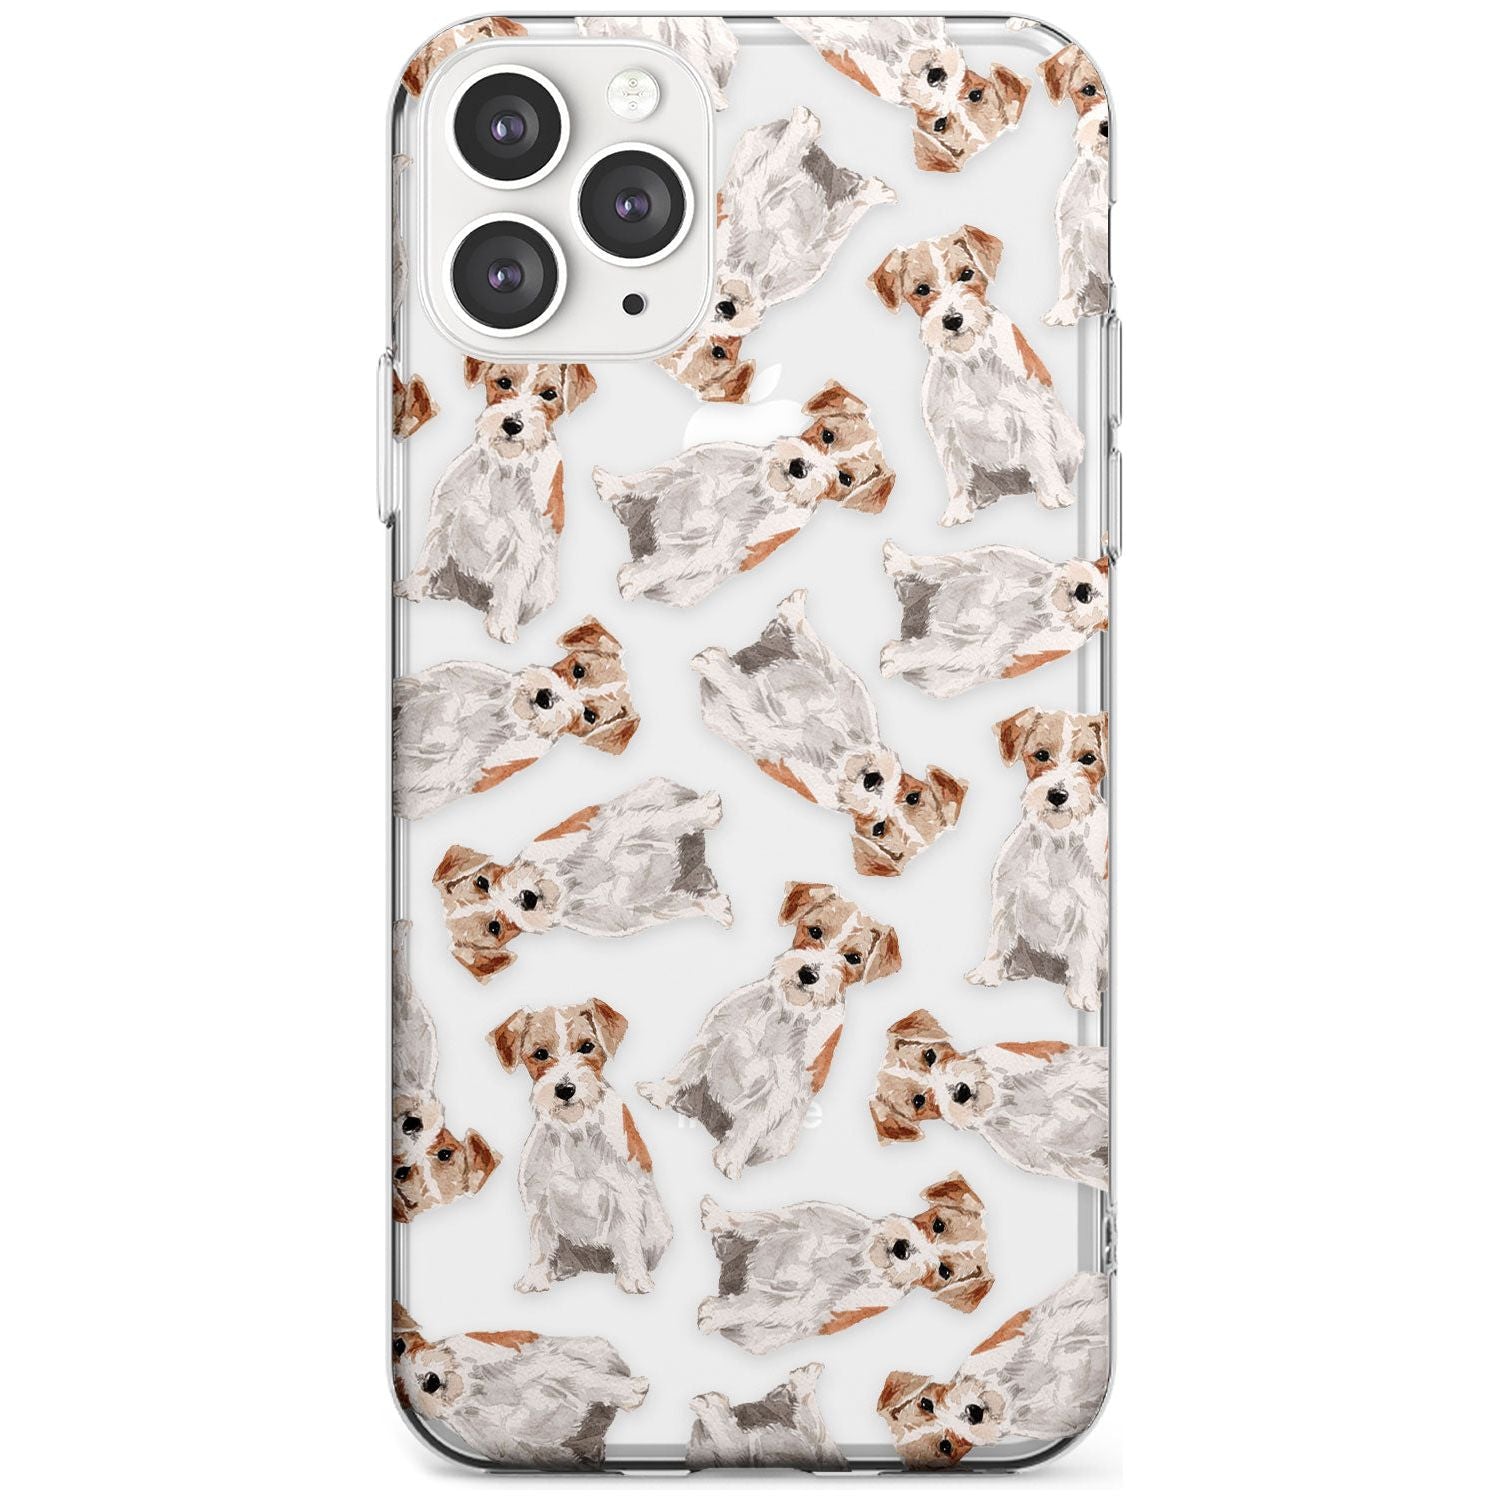 Wirehaired Jack Russell Watercolour Dog Pattern Slim TPU Phone Case for iPhone 11 Pro Max